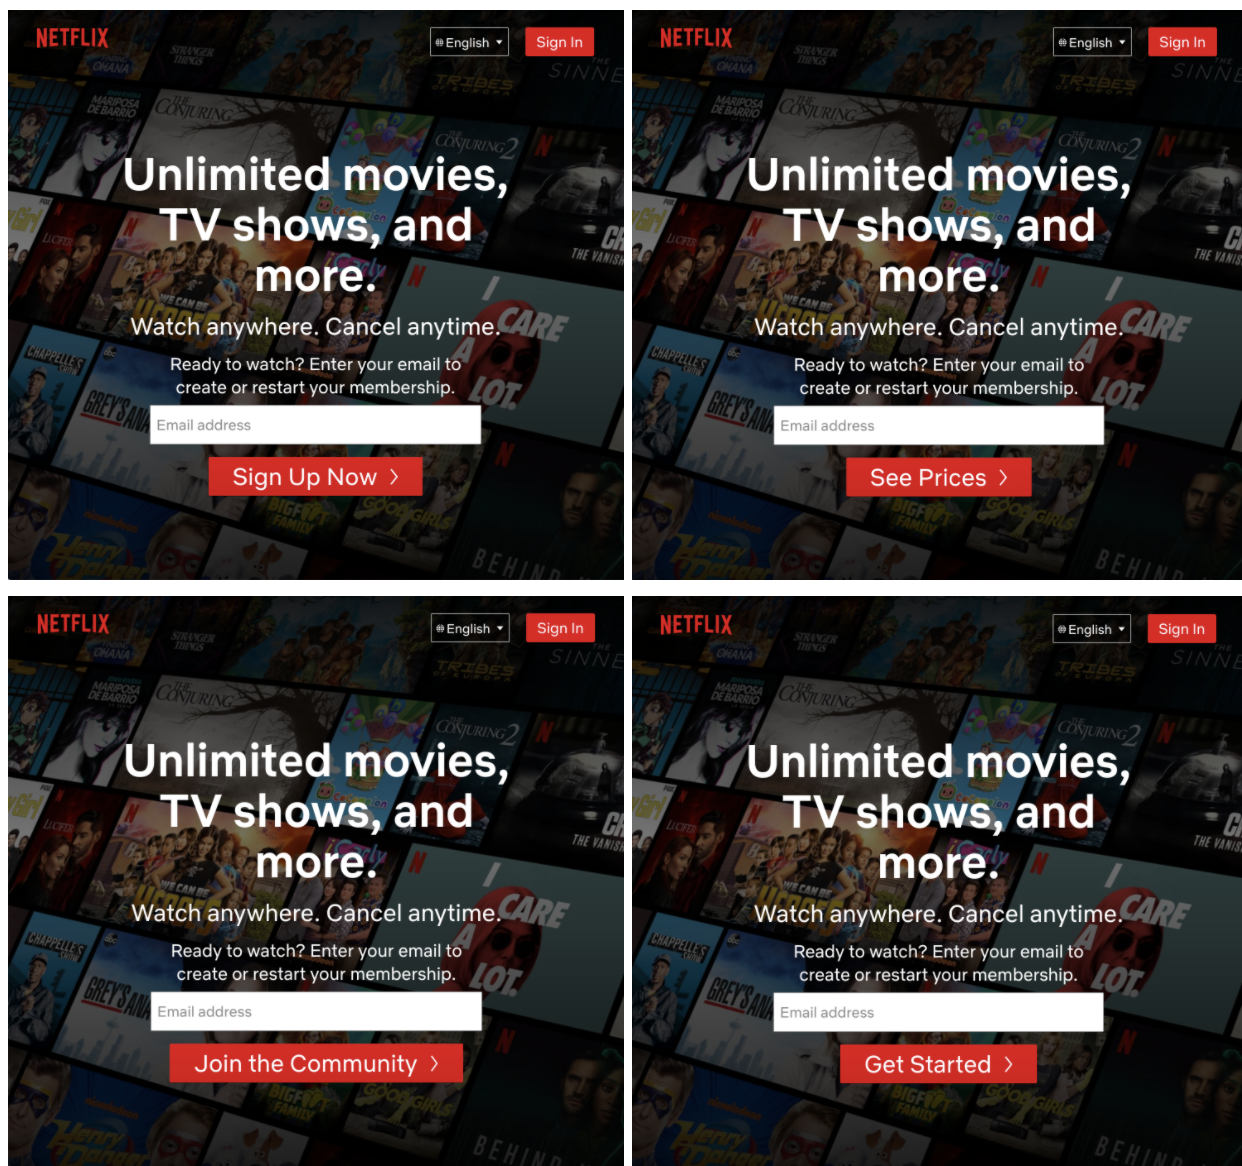 4 versions of netflix landing page with different call to action buttons